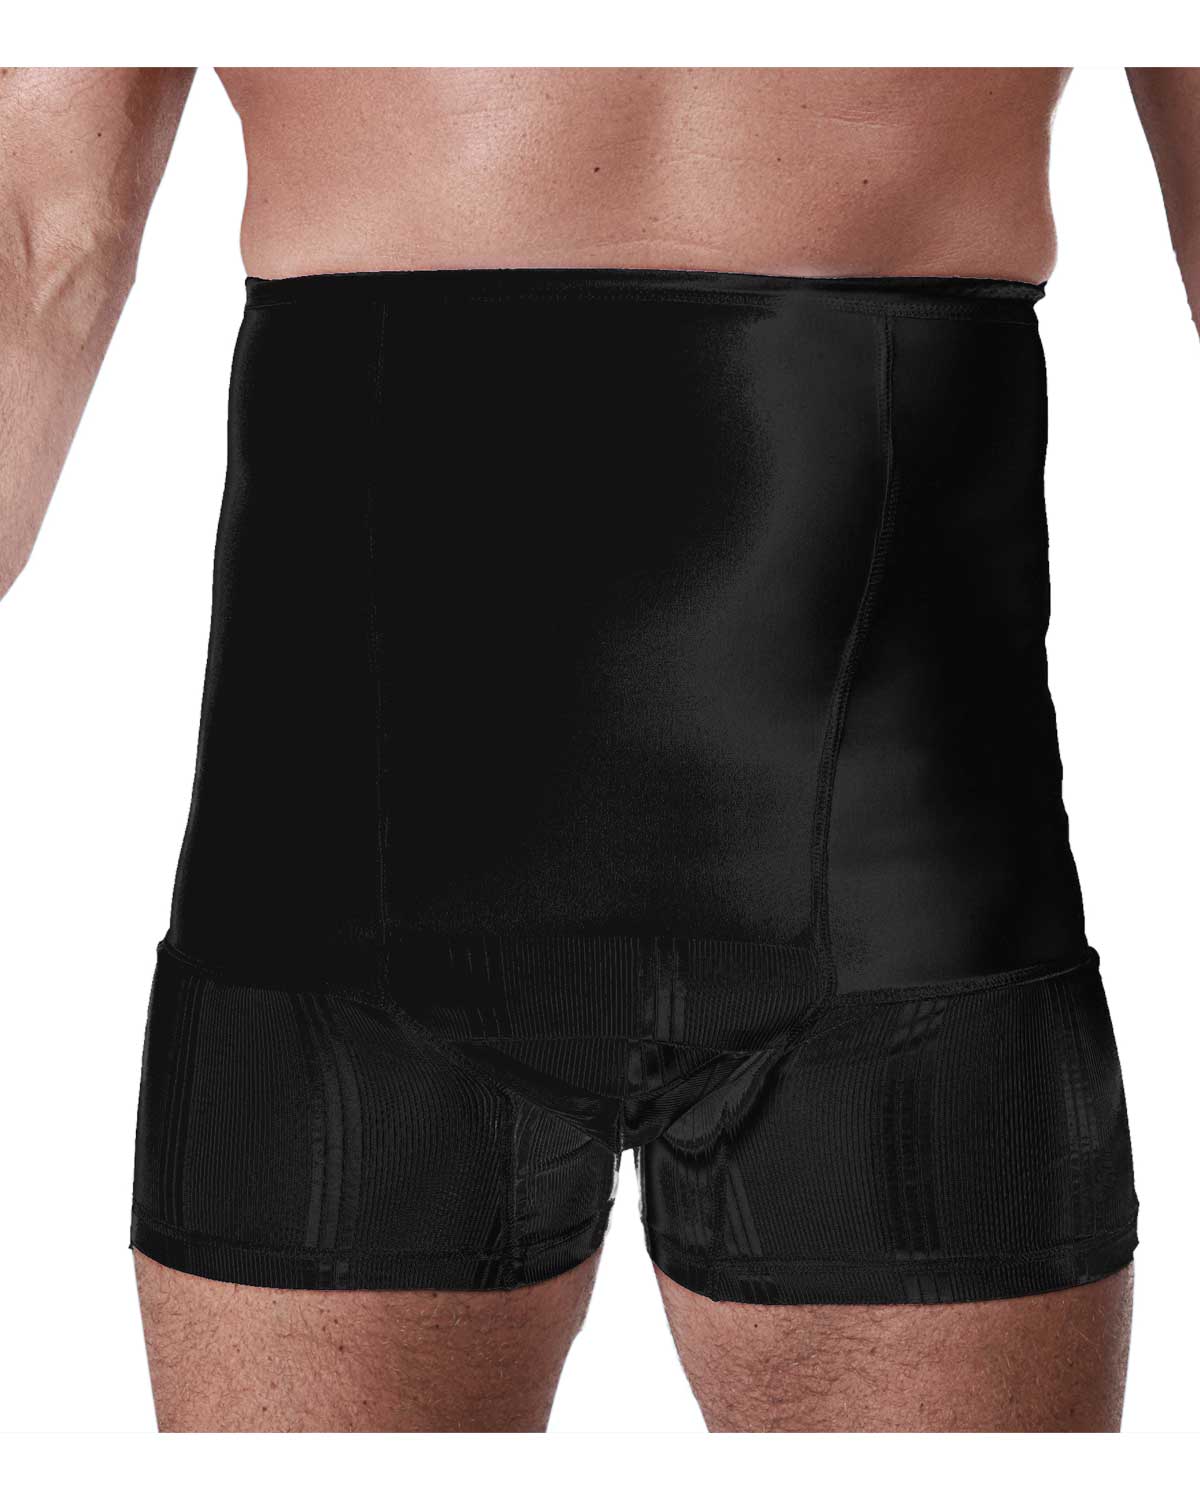 CUI Mens Hernia Low Waist Support Girdle With Legs - 1 each, SMALL, WHITE